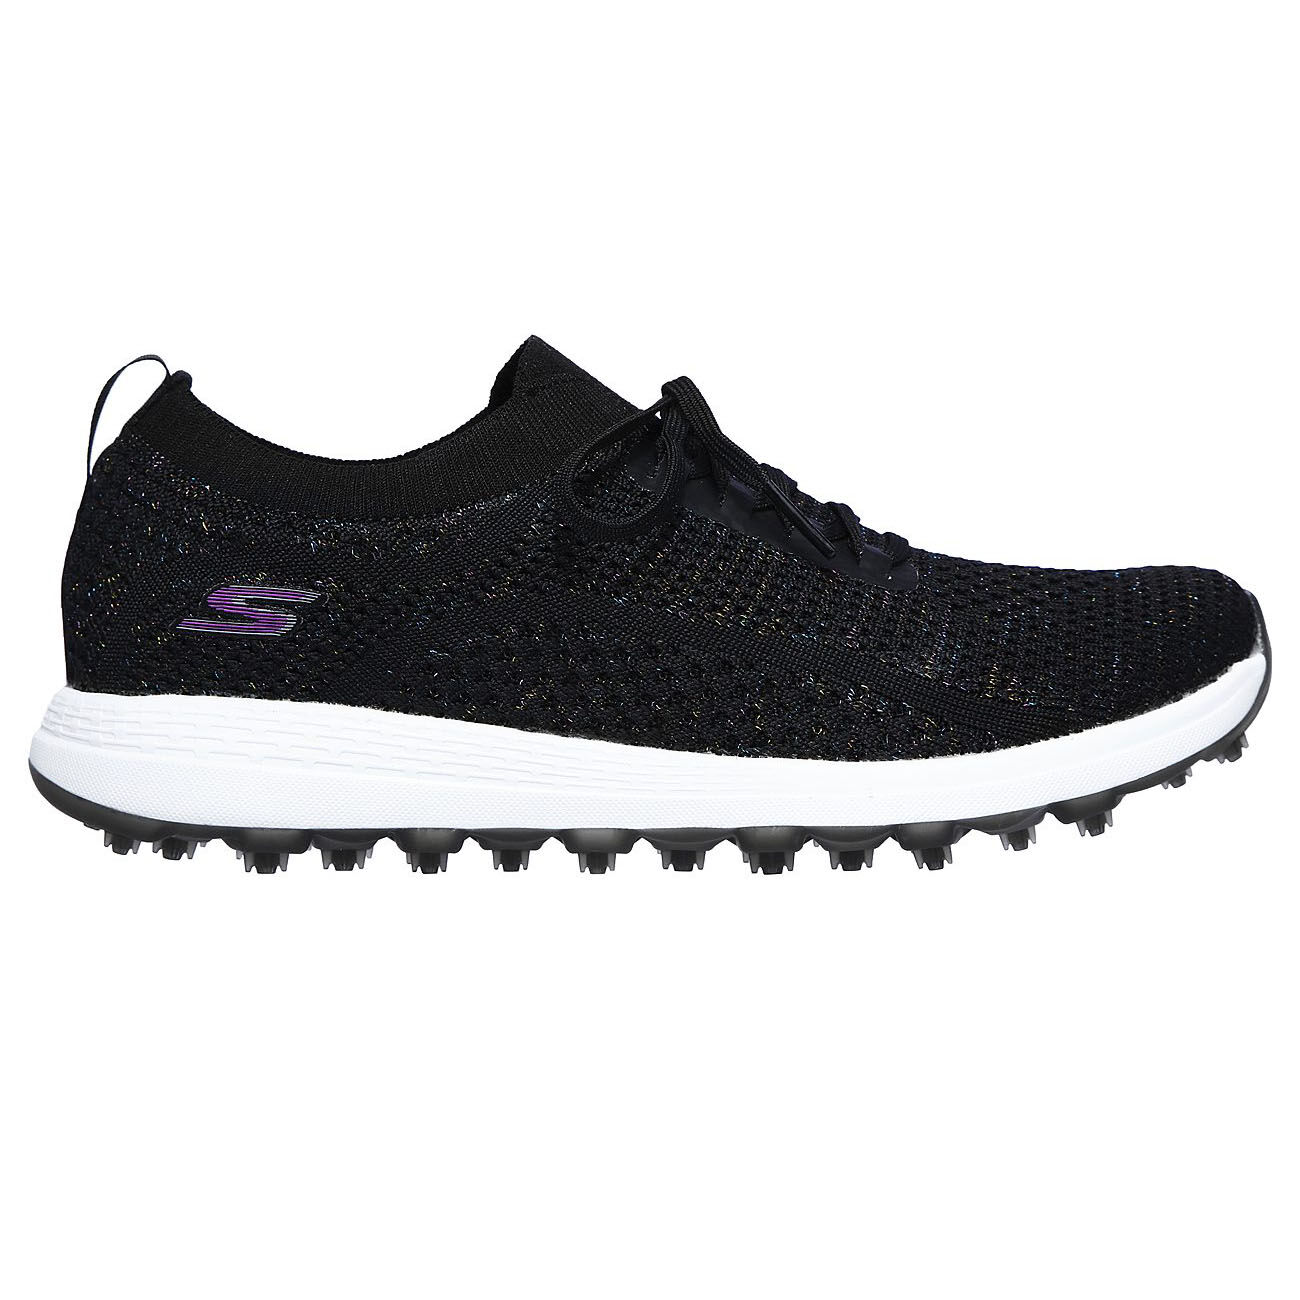 where can i buy skechers golf shoes near me